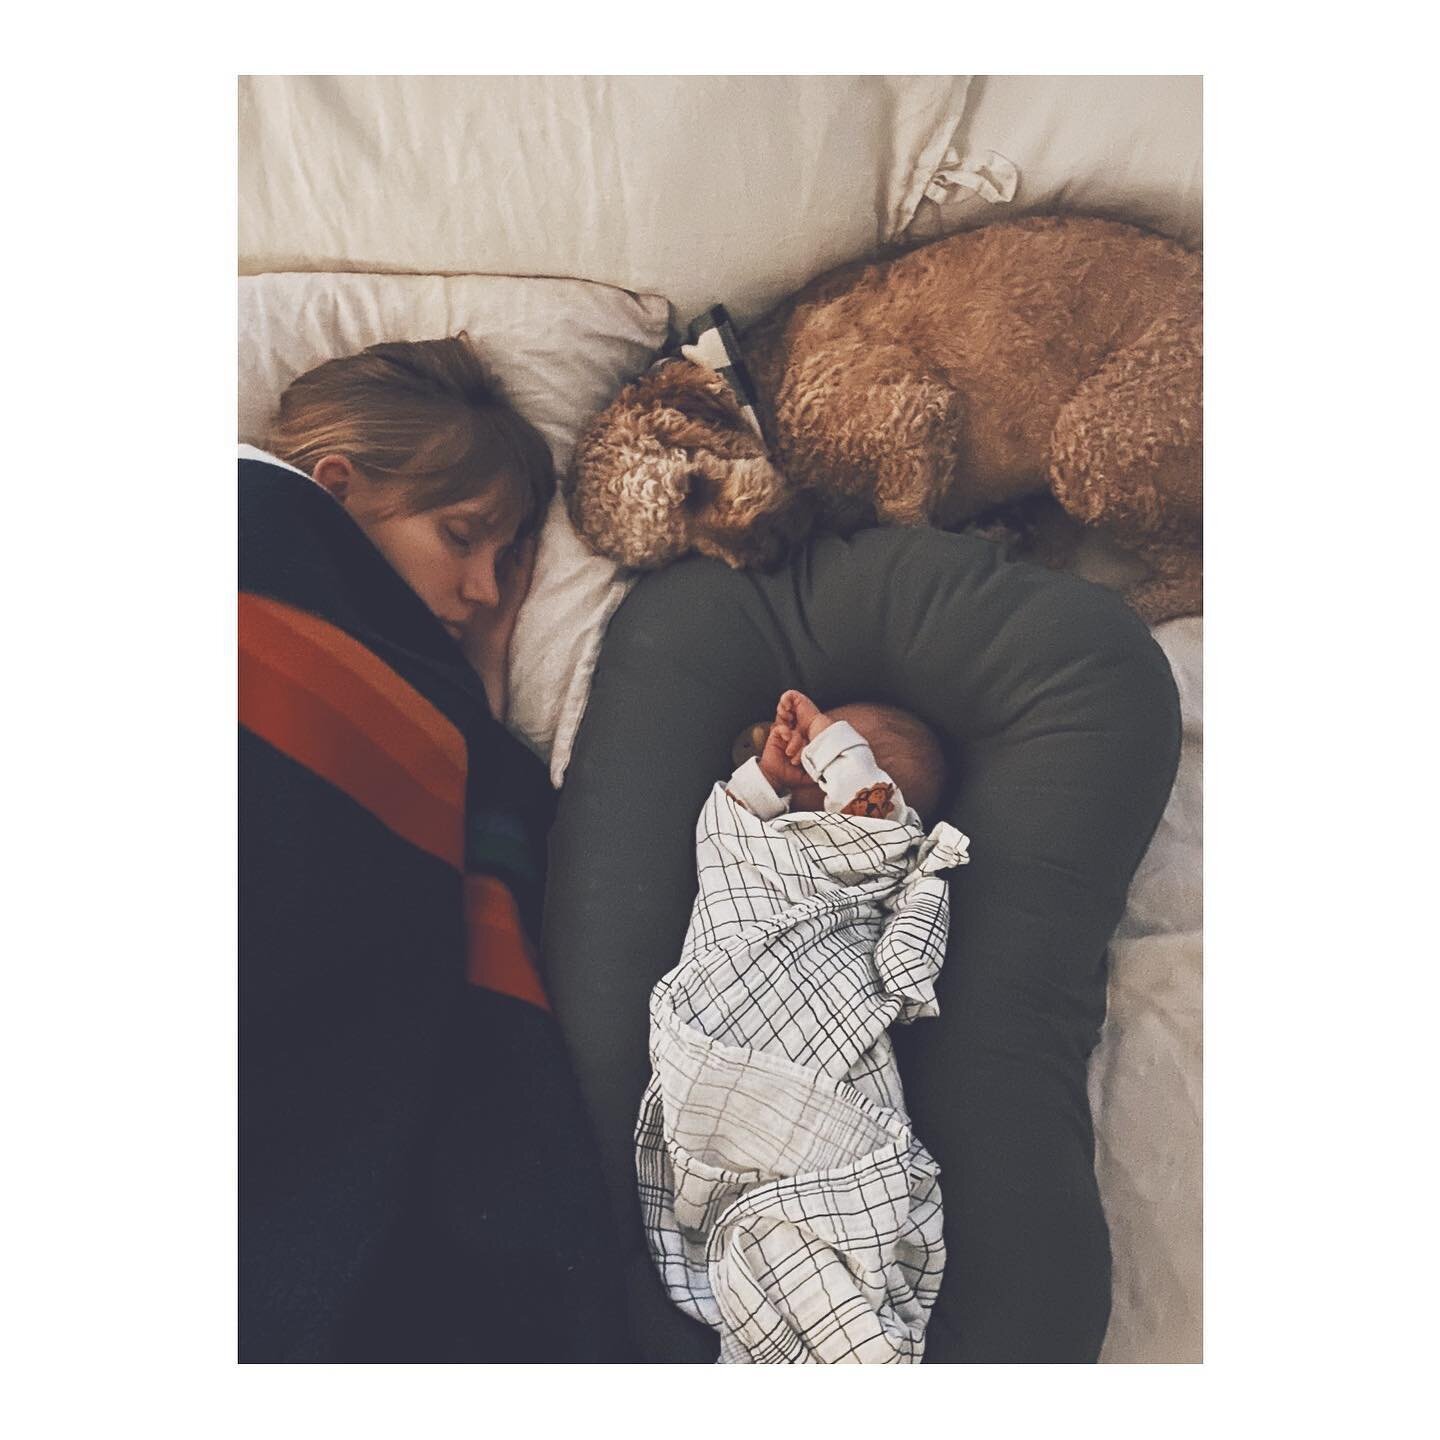 // three in the afternoon with a three week old 🌙

This looks cute, but you know what&rsquo;s cuter? Having the whole bed to yourself for a juicy hour long nap completely signed off duty while your postpartum doula takes the wheel, only to wake up t